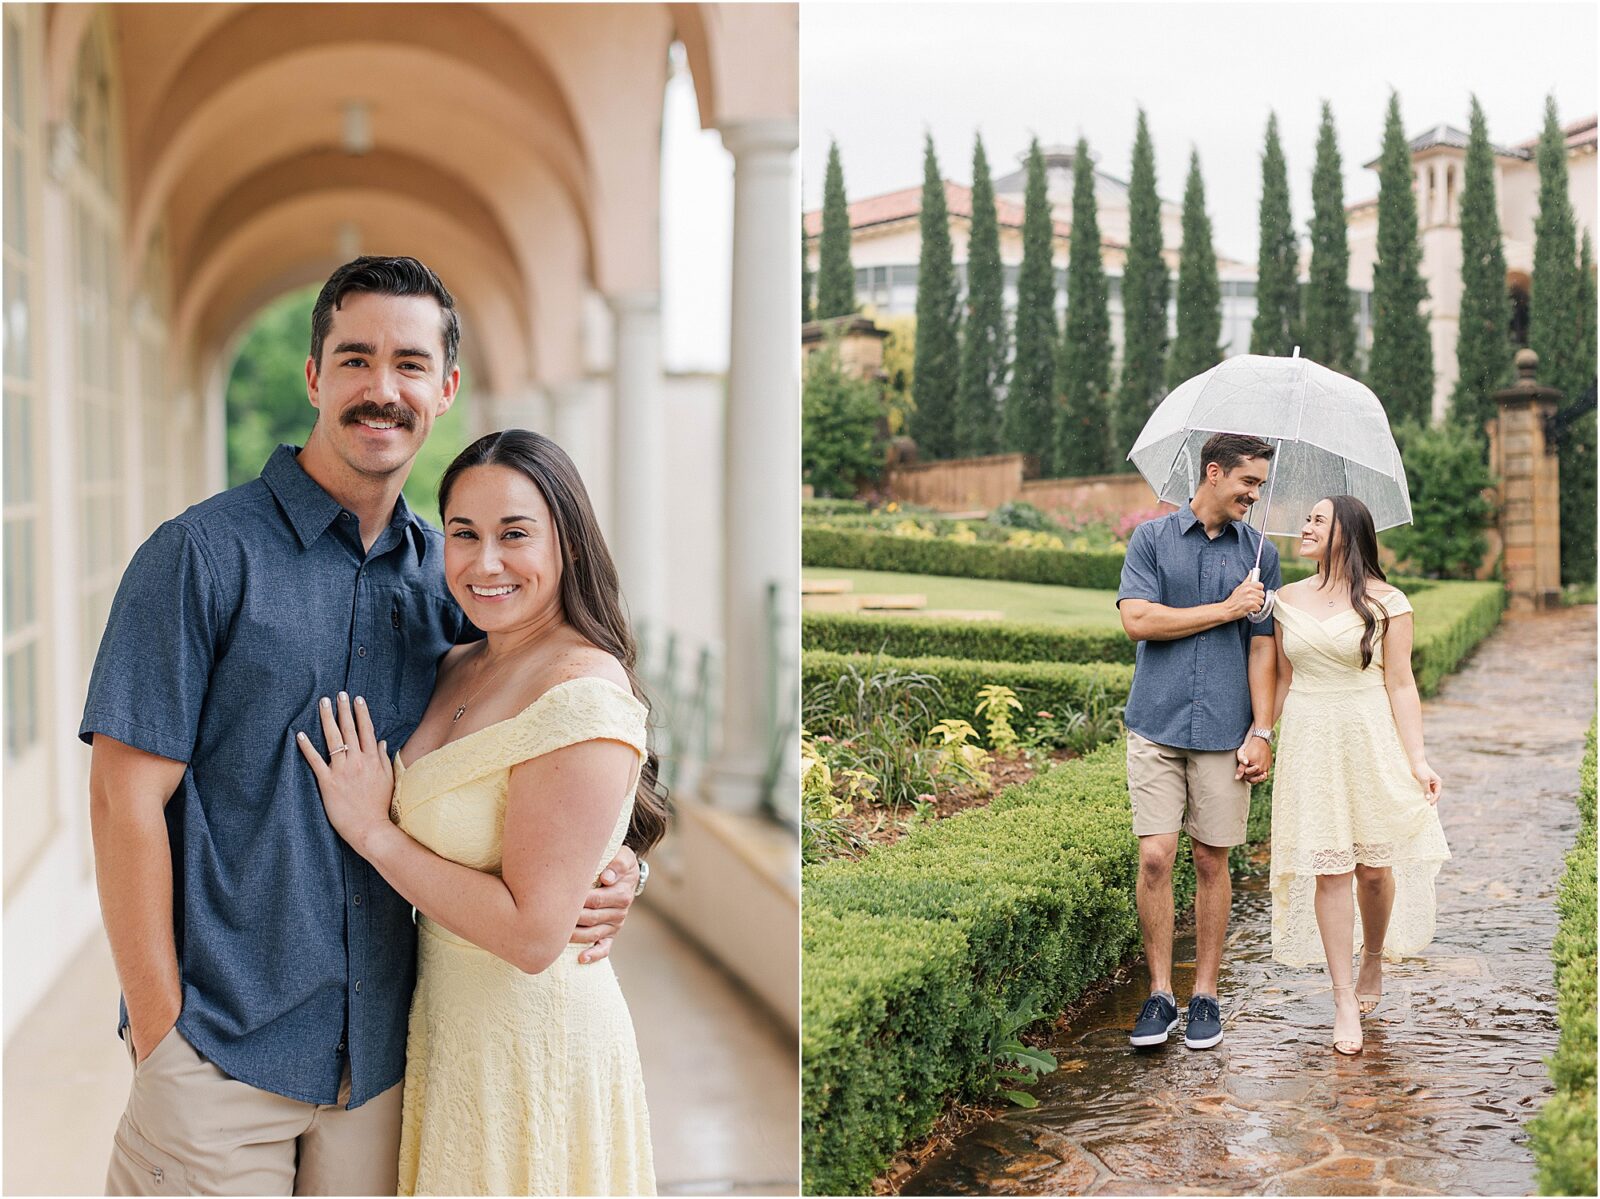 Marie and Mark taking a walk through the Tuscan gardens during their rainy engagement session at the philbrook